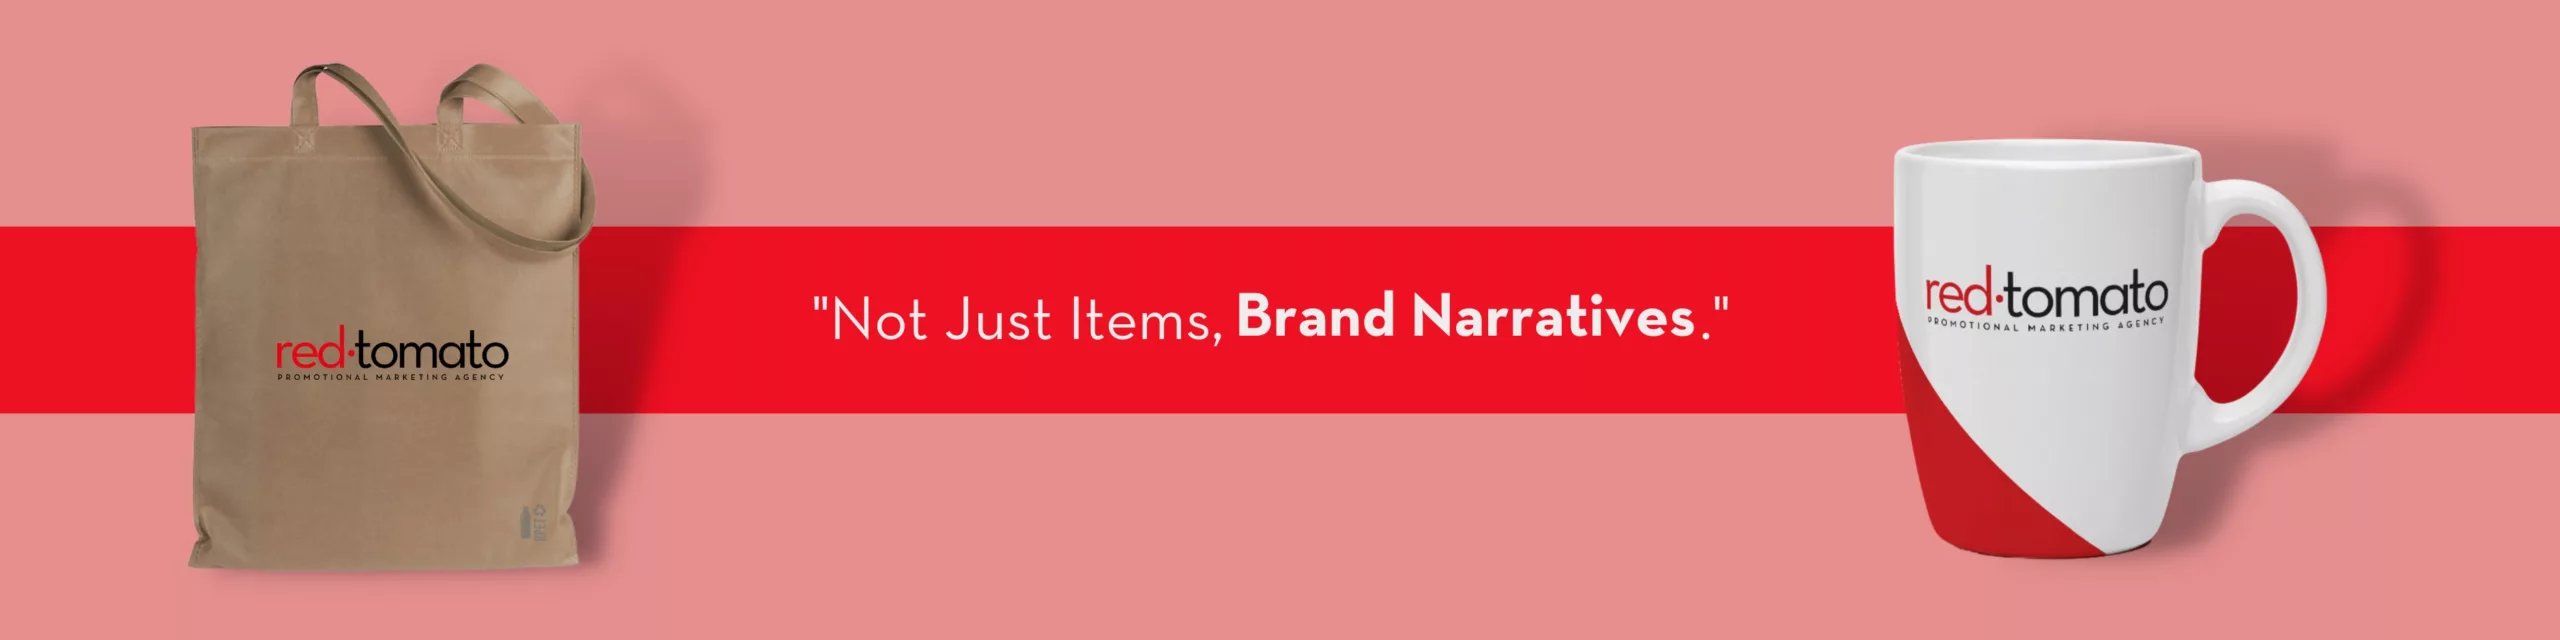 Merchandise and brand narratives